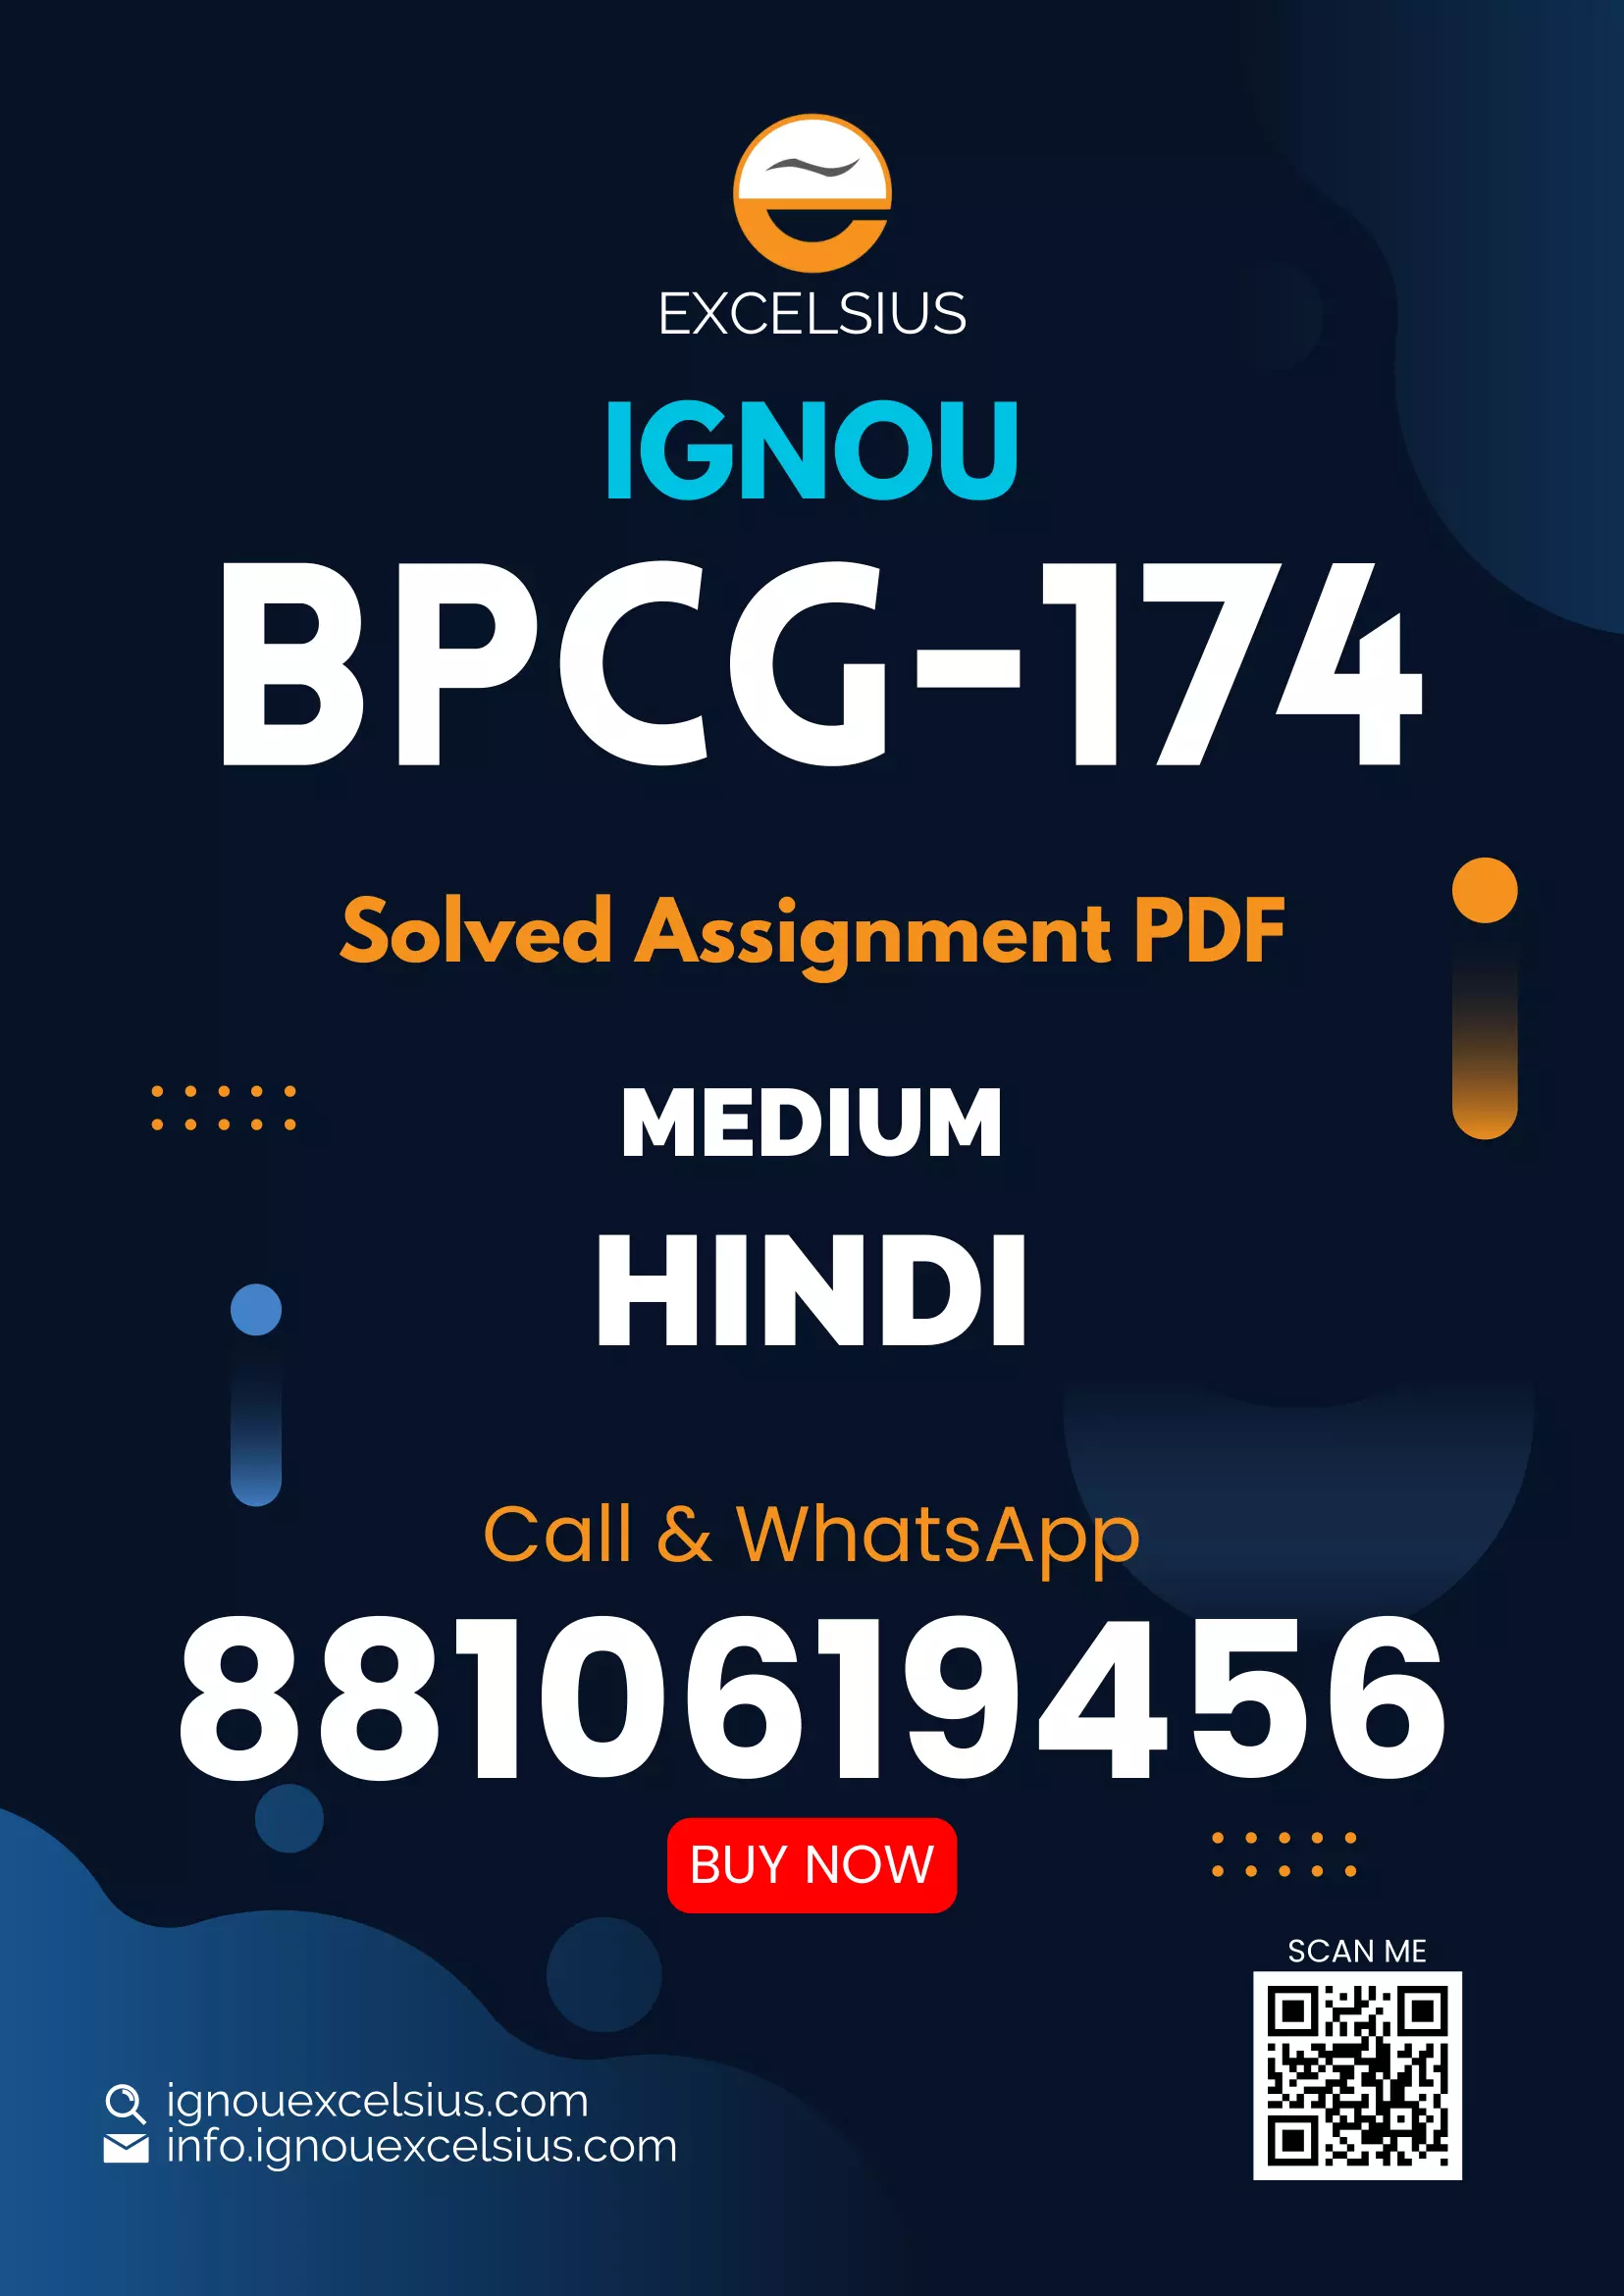 IGNOU BPCG-174 - Psychology and Media, Latest Solved Assignment-July 2022 – January 2023